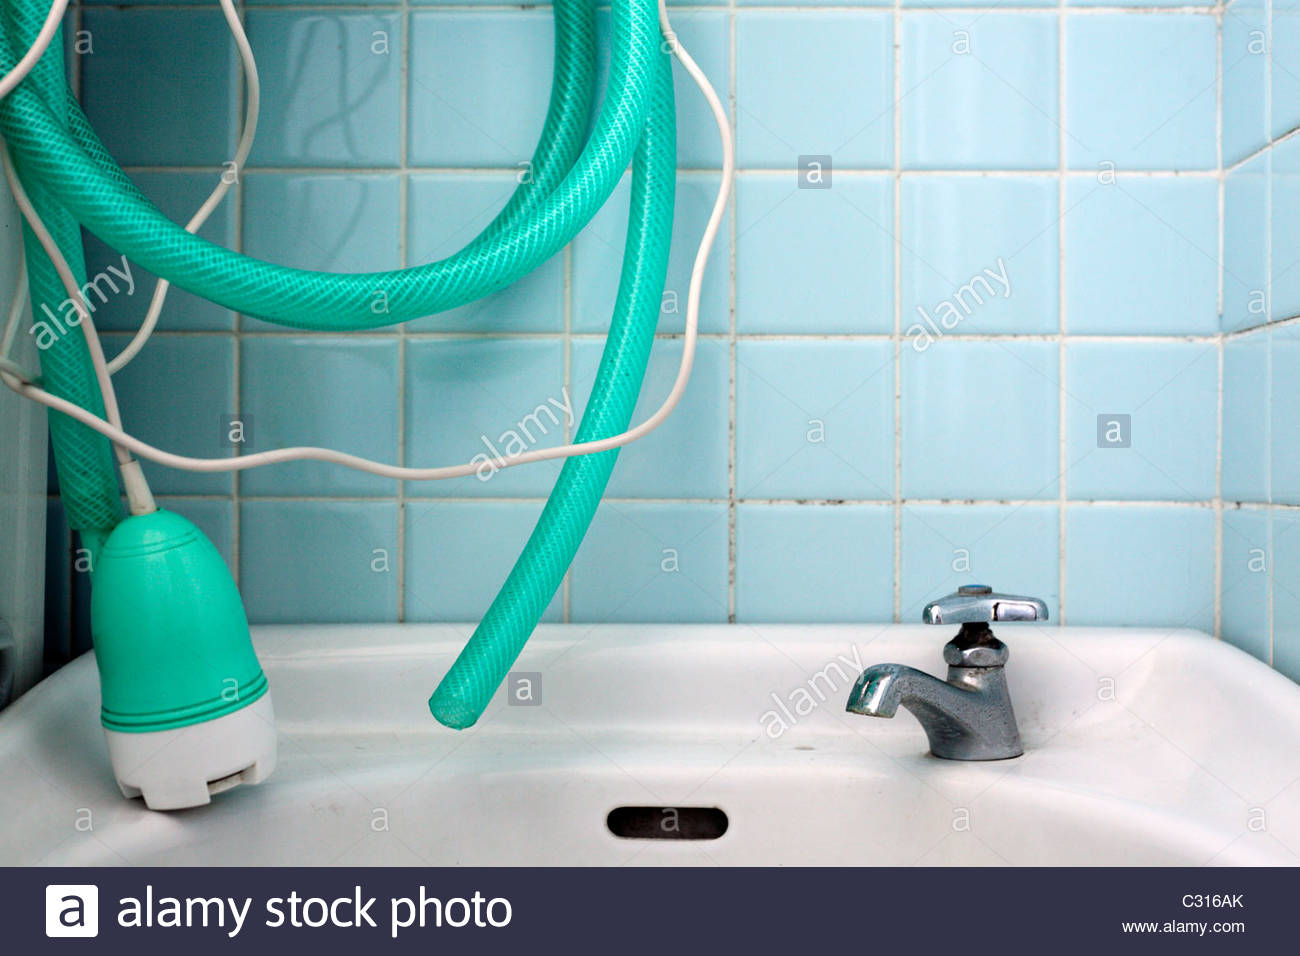 Small Bathroom Sink With Hose A Electric Water Pump And